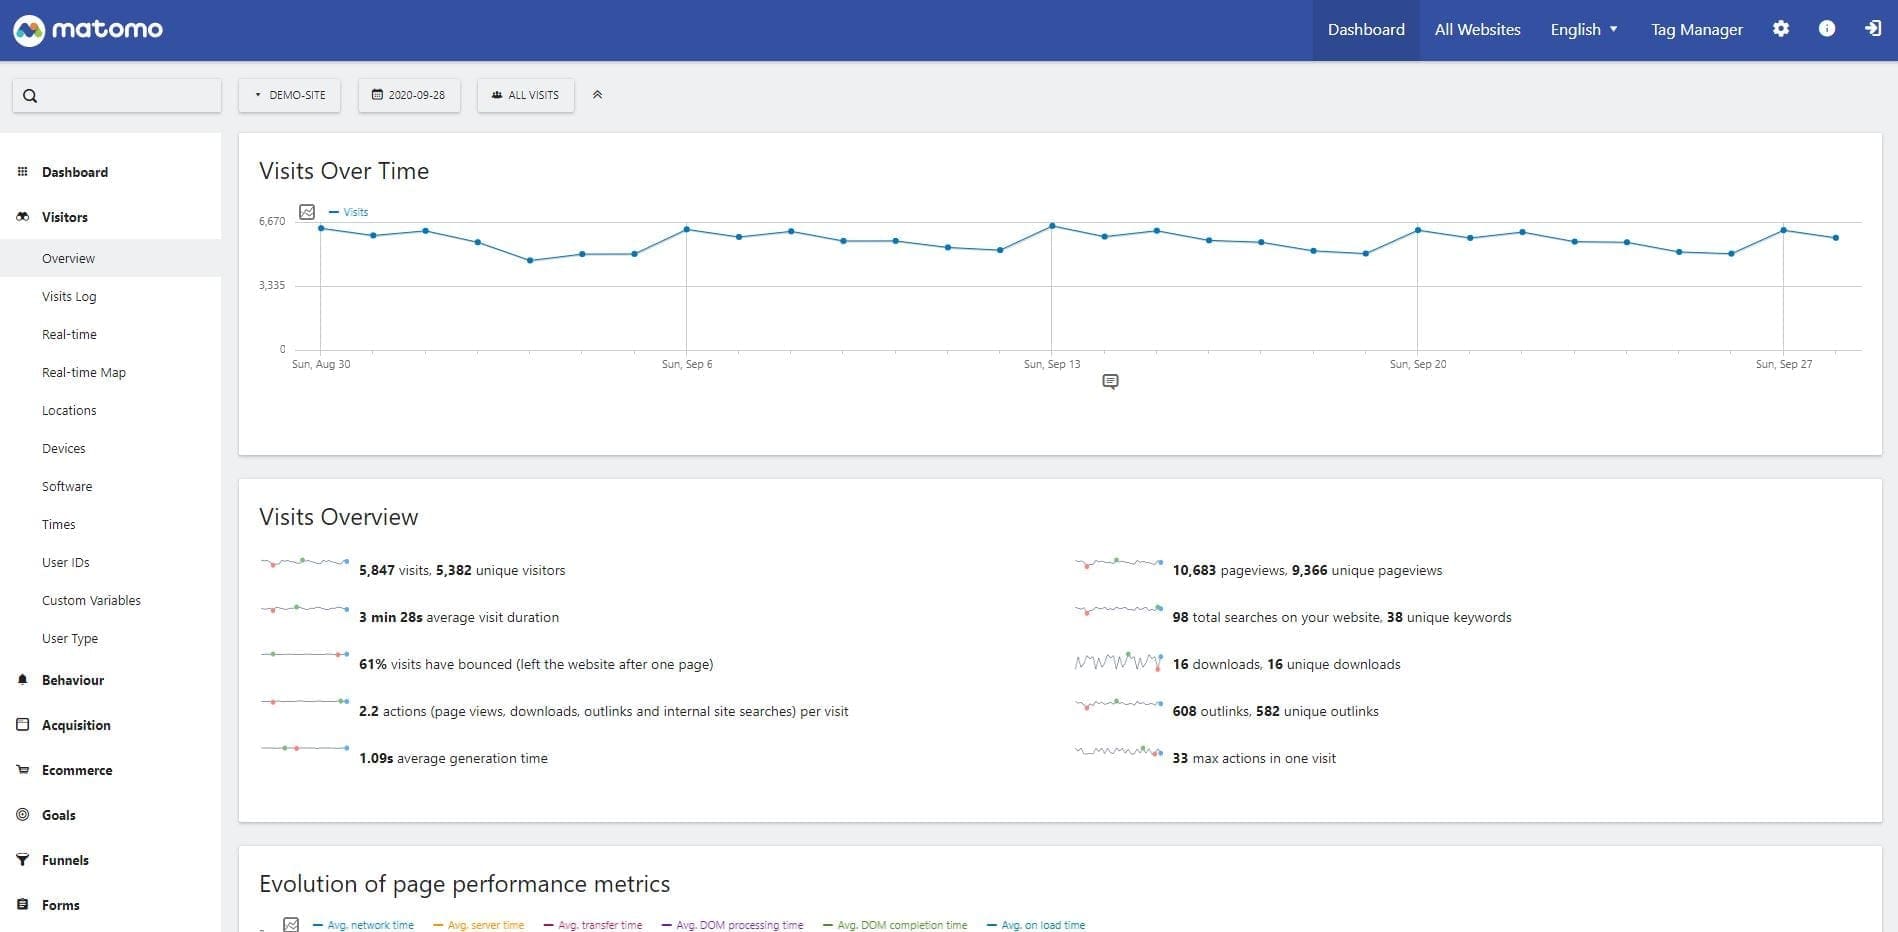 Matomo analytics demo site showing an overview of visitors to the site